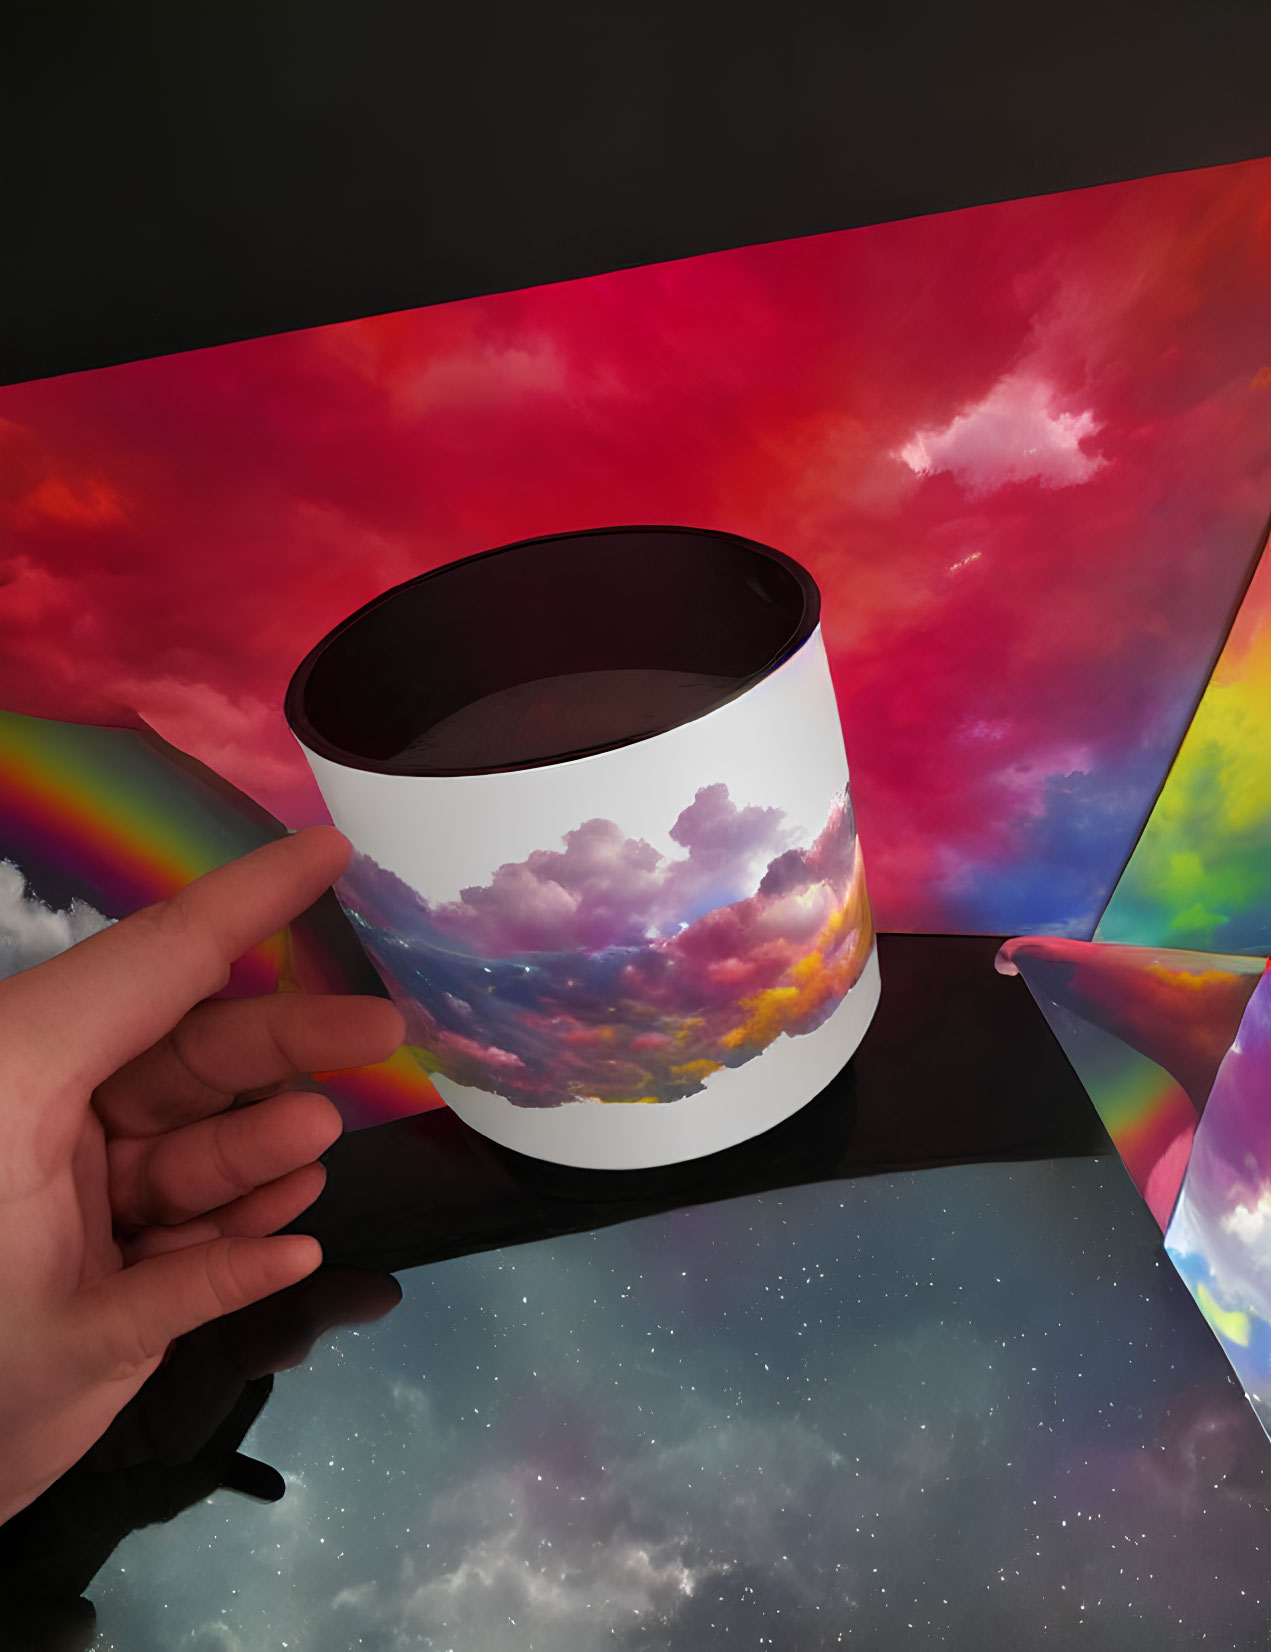 Colorful Hand Holding Cloudscape Cylindrical Object on Psychedelic Background